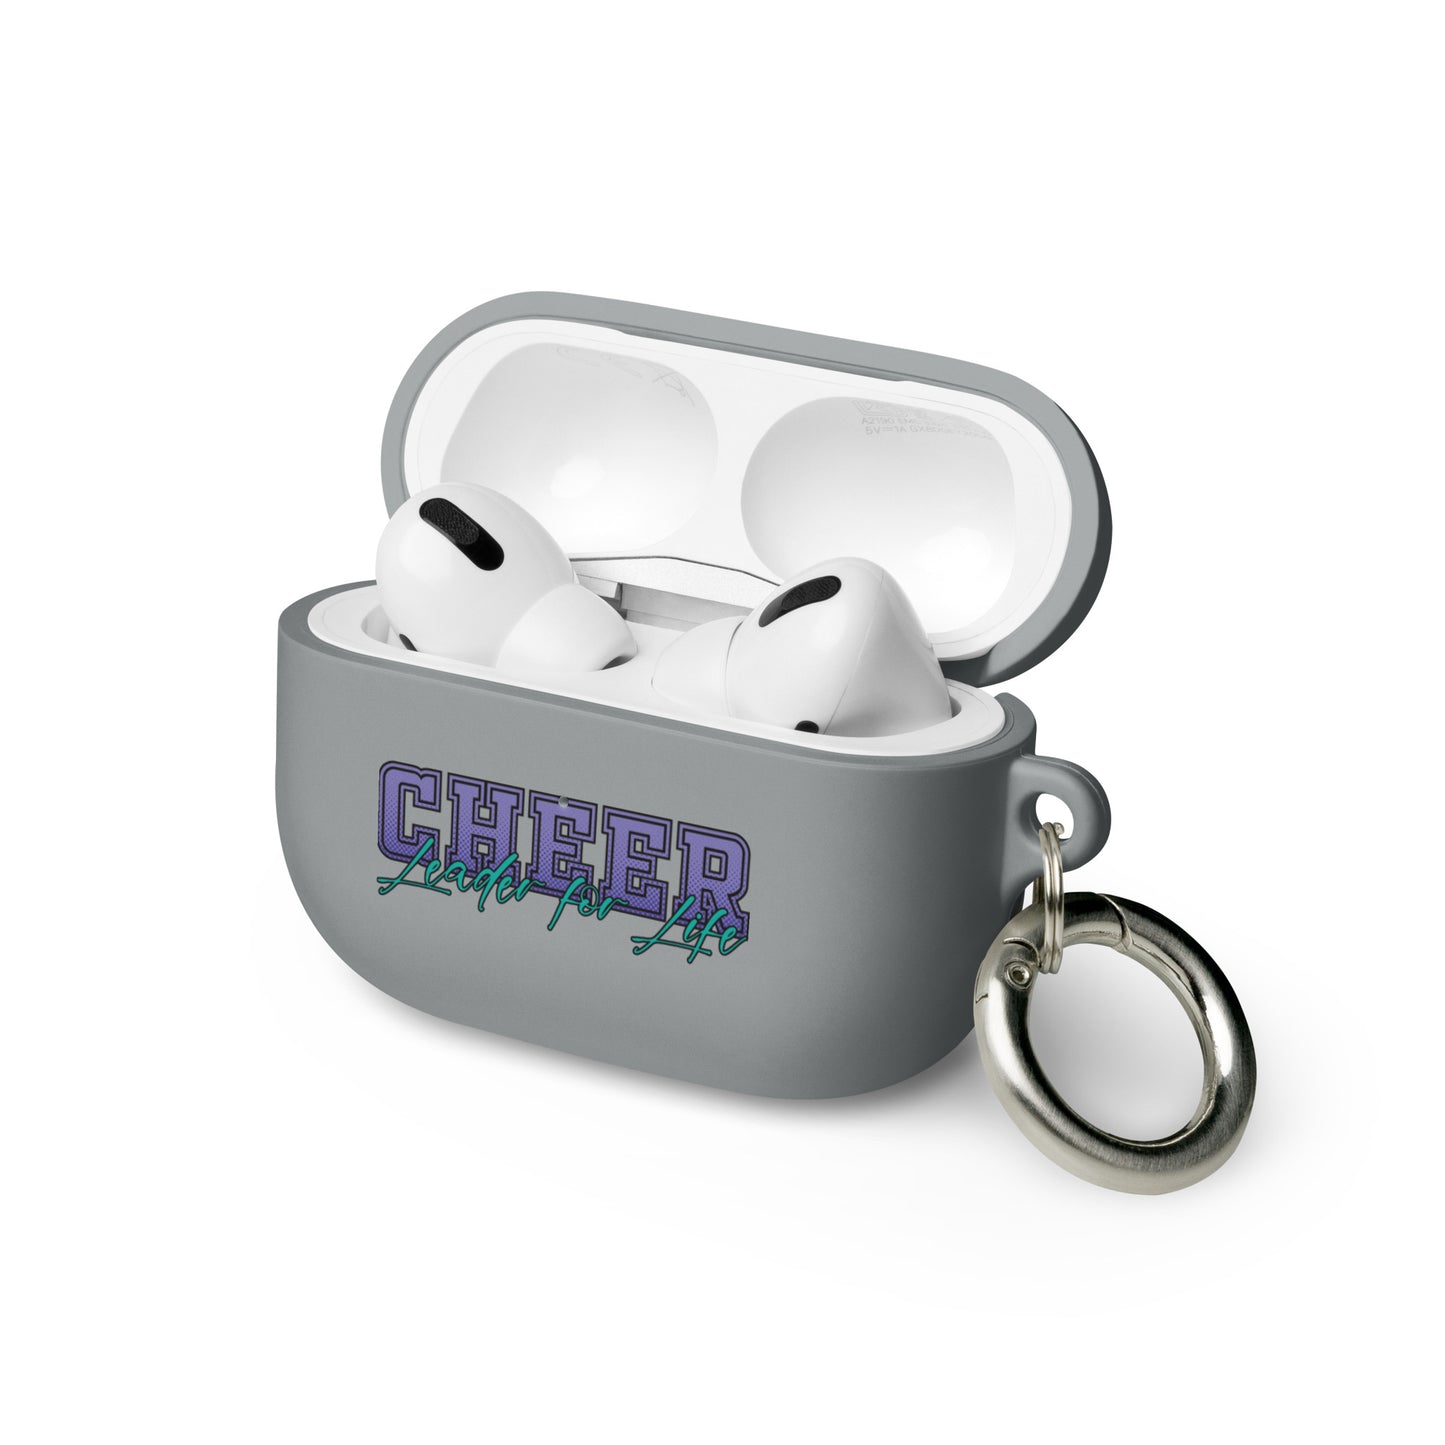 CHEER Leader for Life: AirPods case or AirPods Pro case